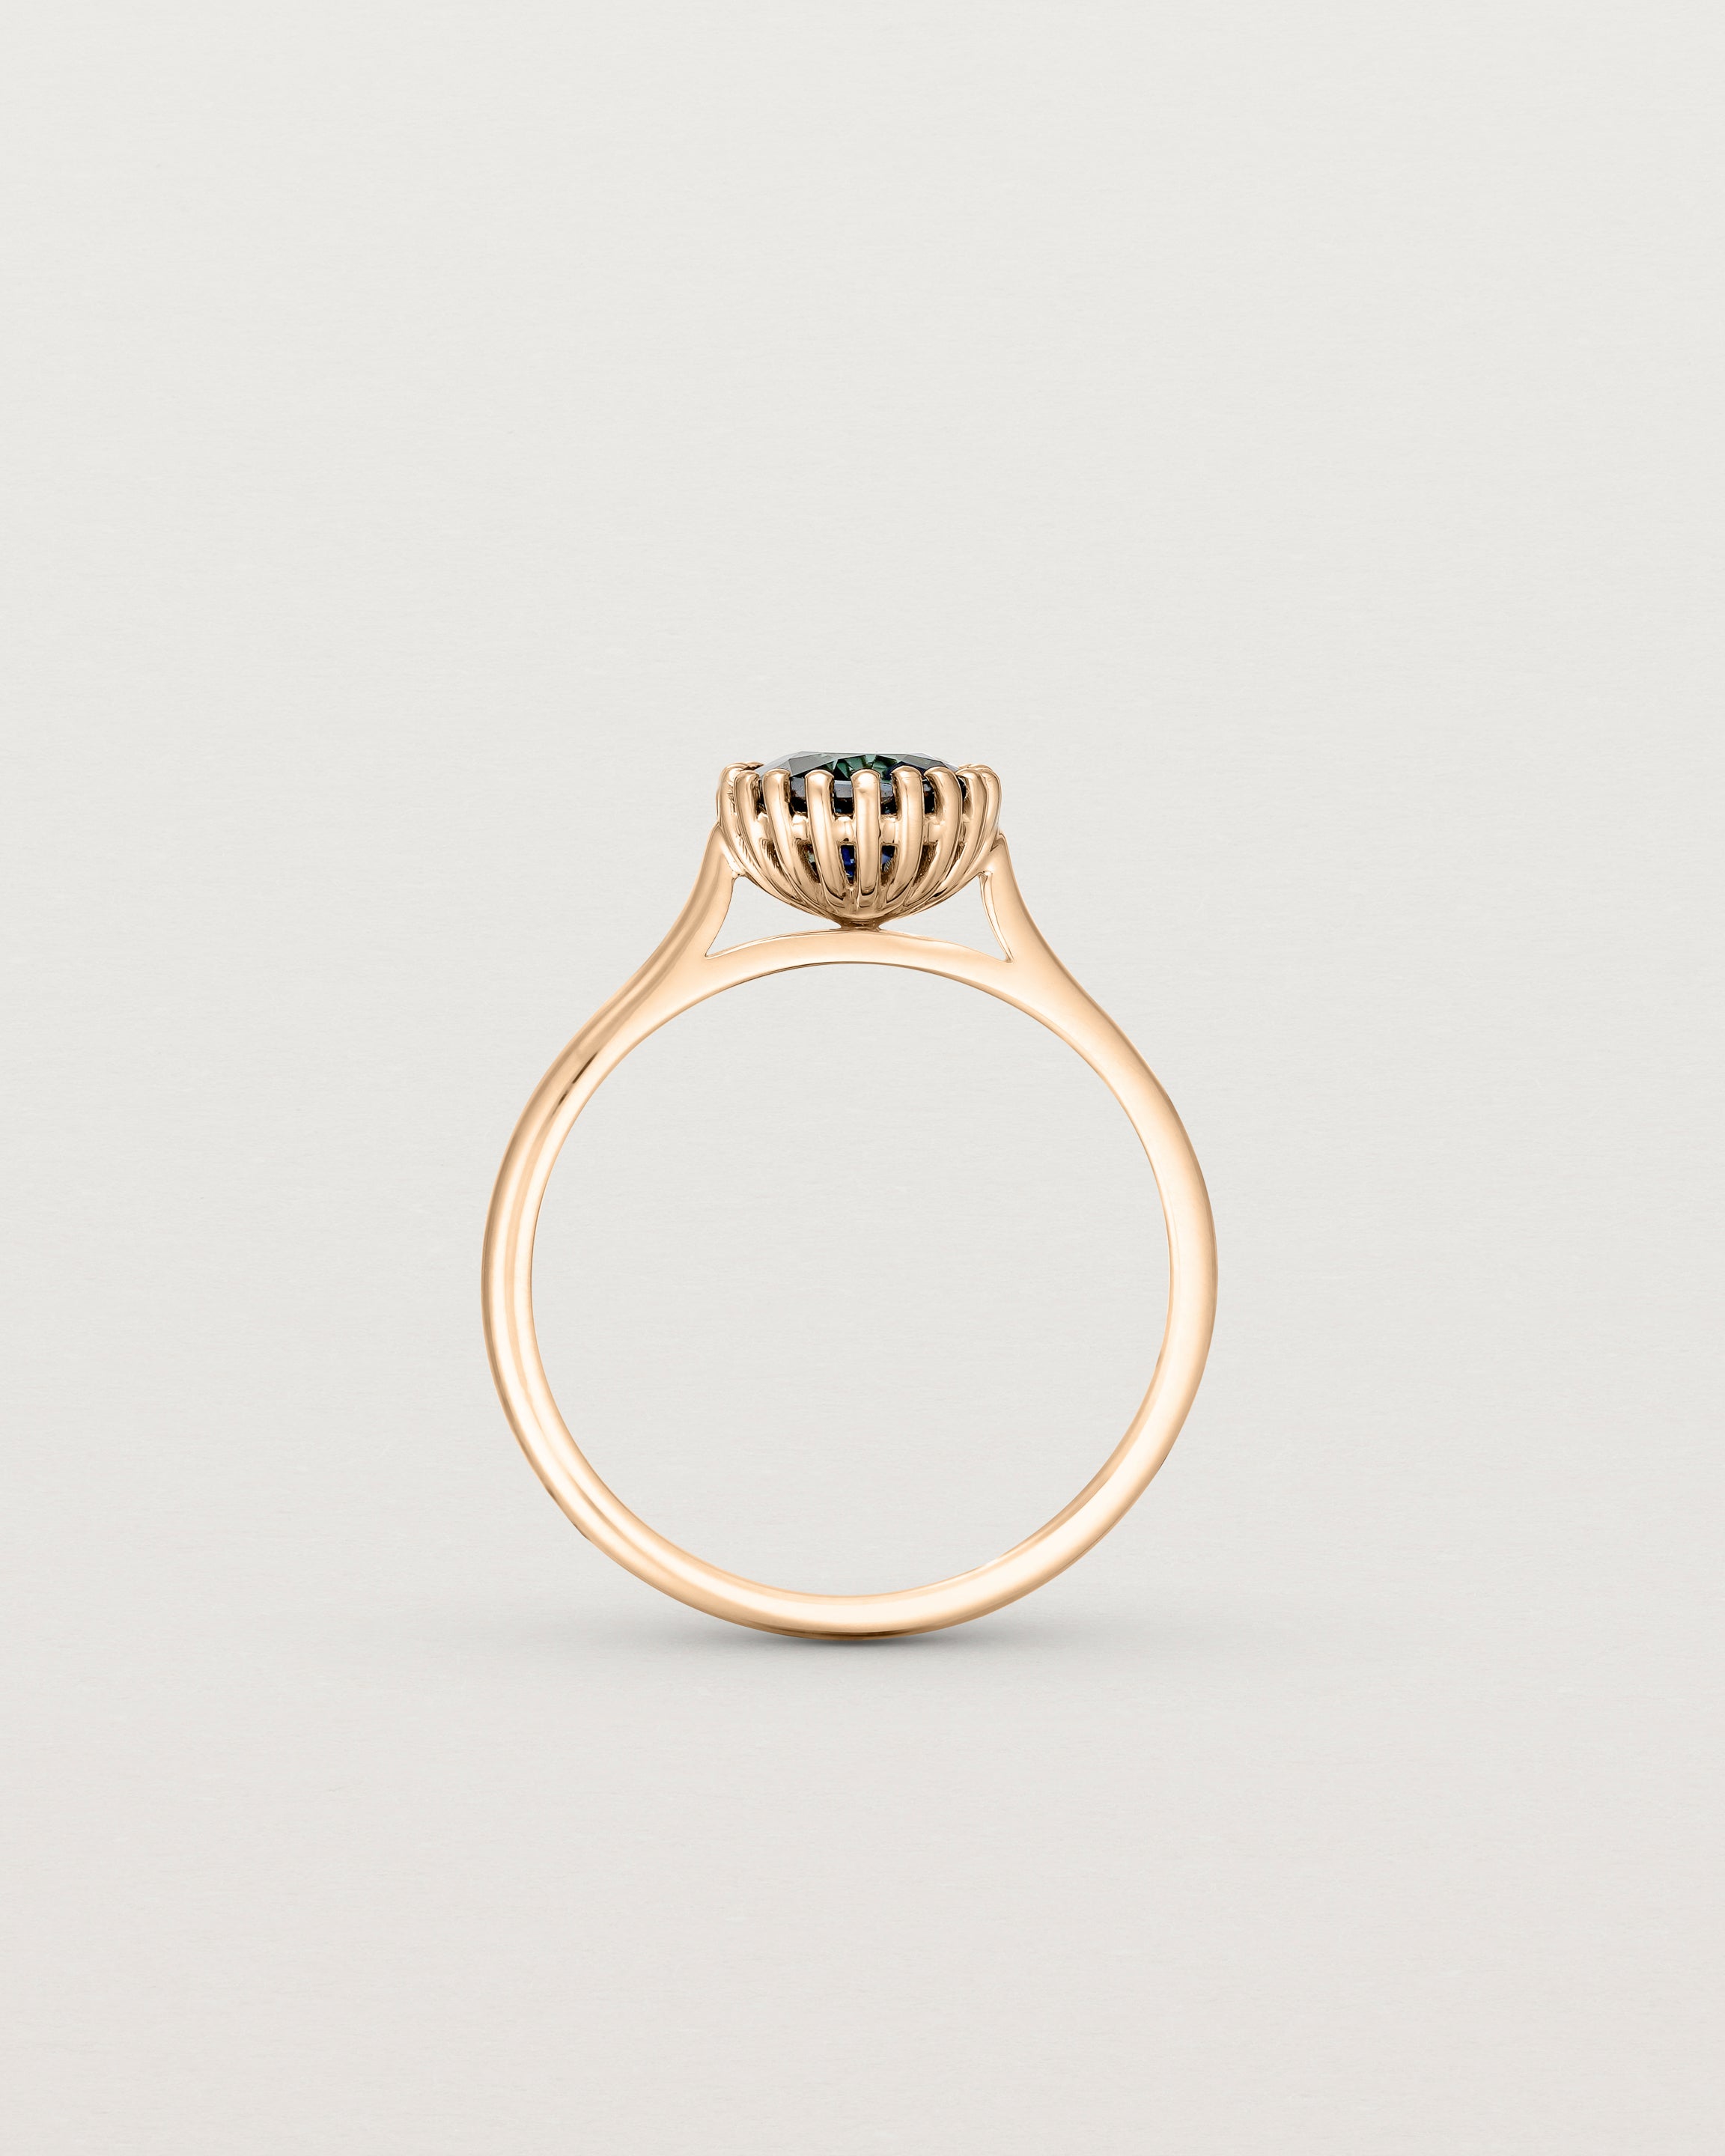 Standing view of the Meroë Round Solitaire | Australian Sapphire in rose gold.